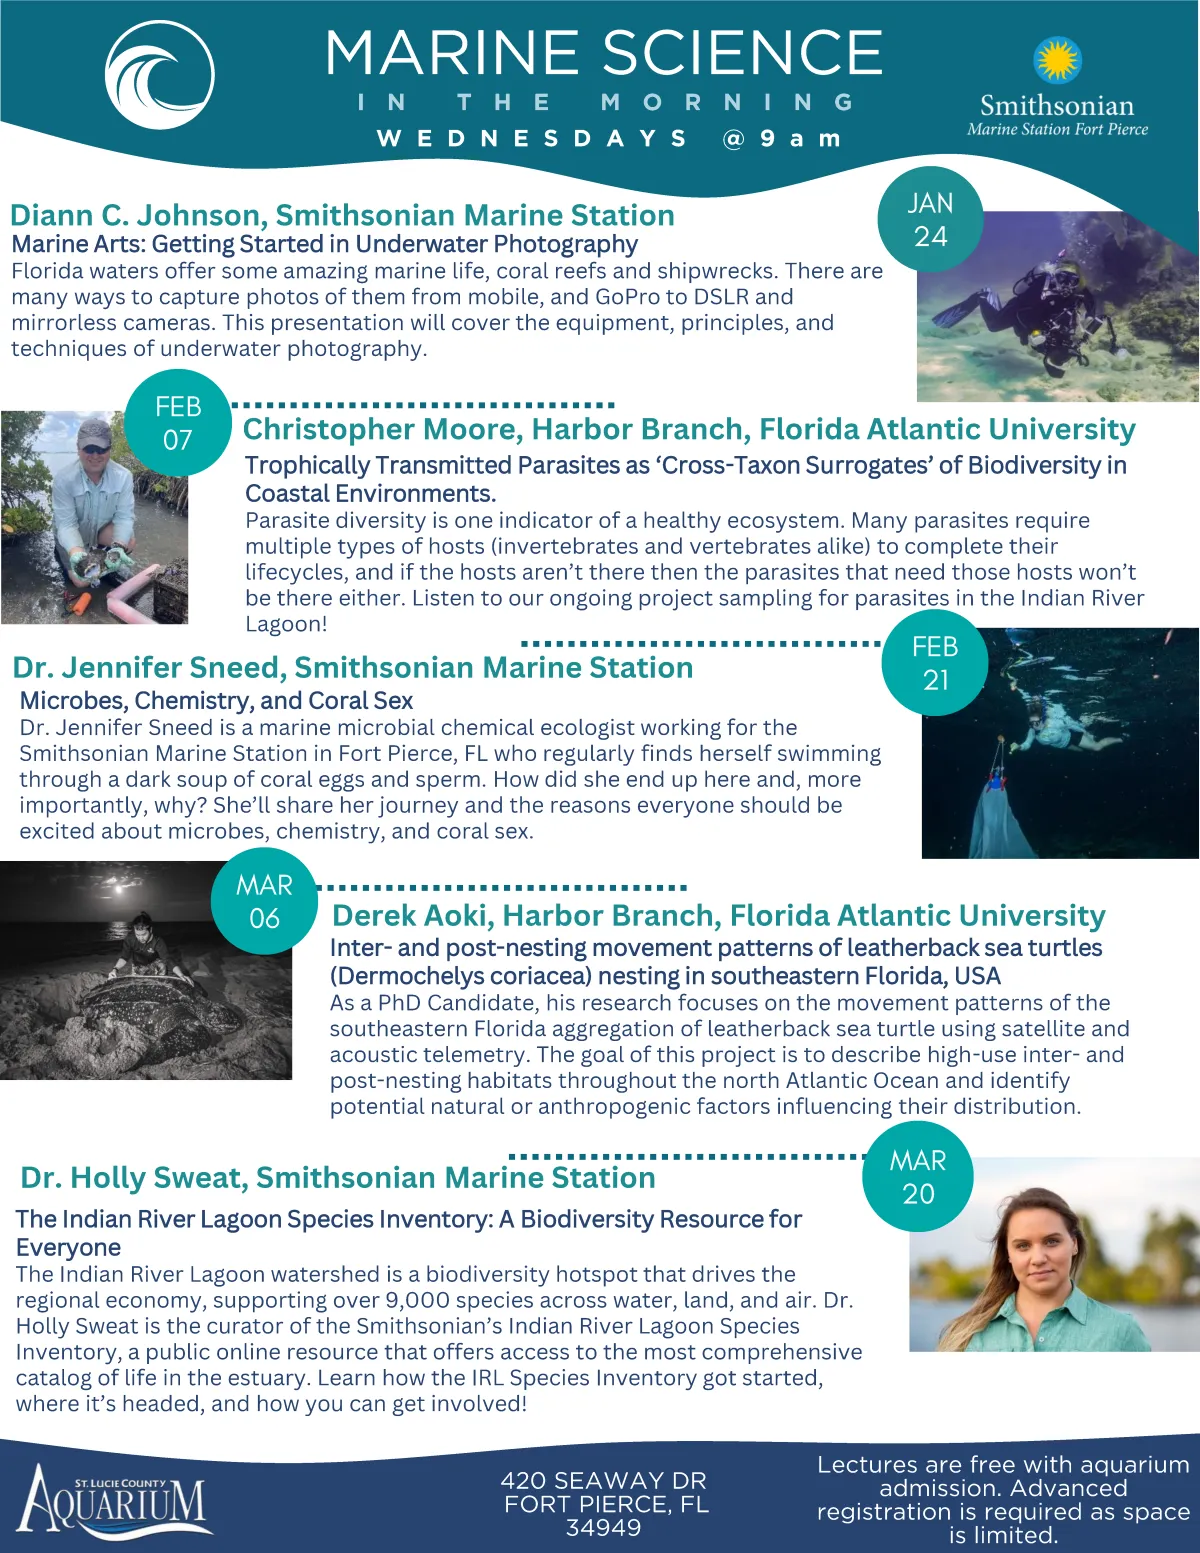 Marine Science in the Morning Flyer